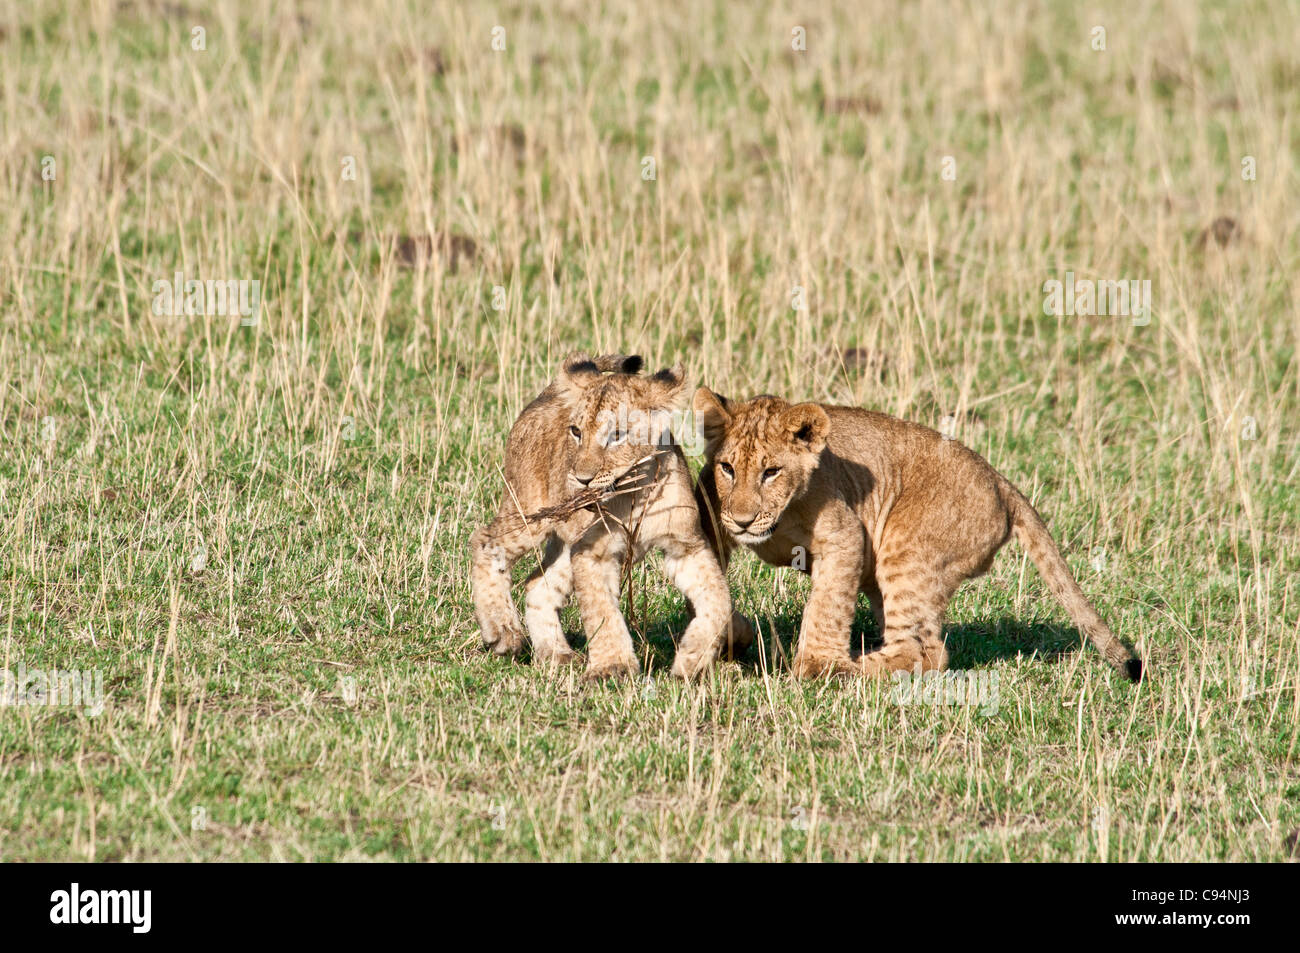 Two Lion Cubs side by side, Panthera leo, Masai Mara National Reserve, Kenya, Africa Stock Photo